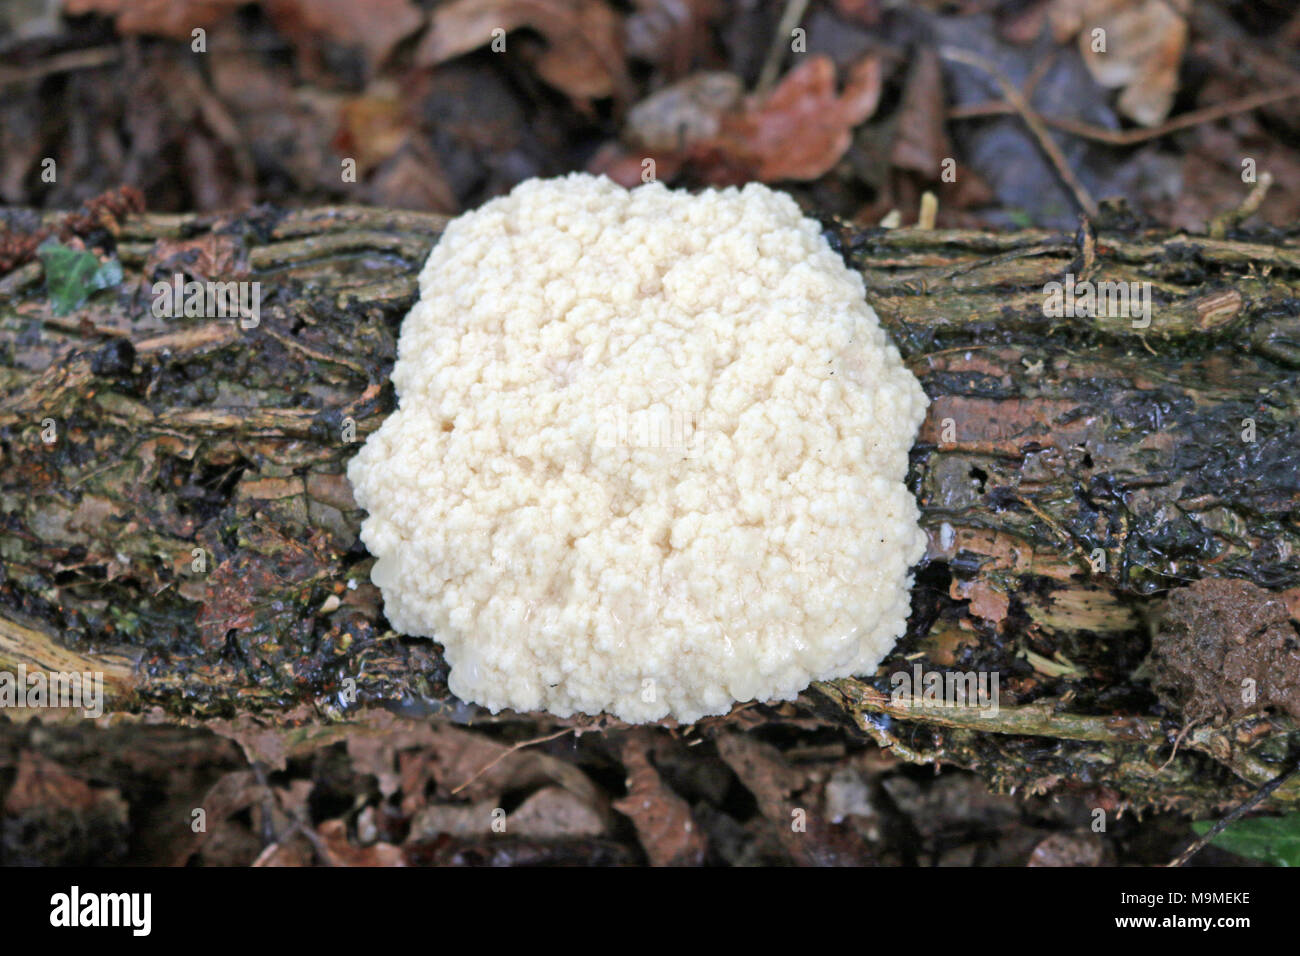 White cauliflower slime mould or false puffball (Enteridium lycoperdon also known as Reticularia lycoperdon) on a rotting dead wood log with dead leav Stock Photo